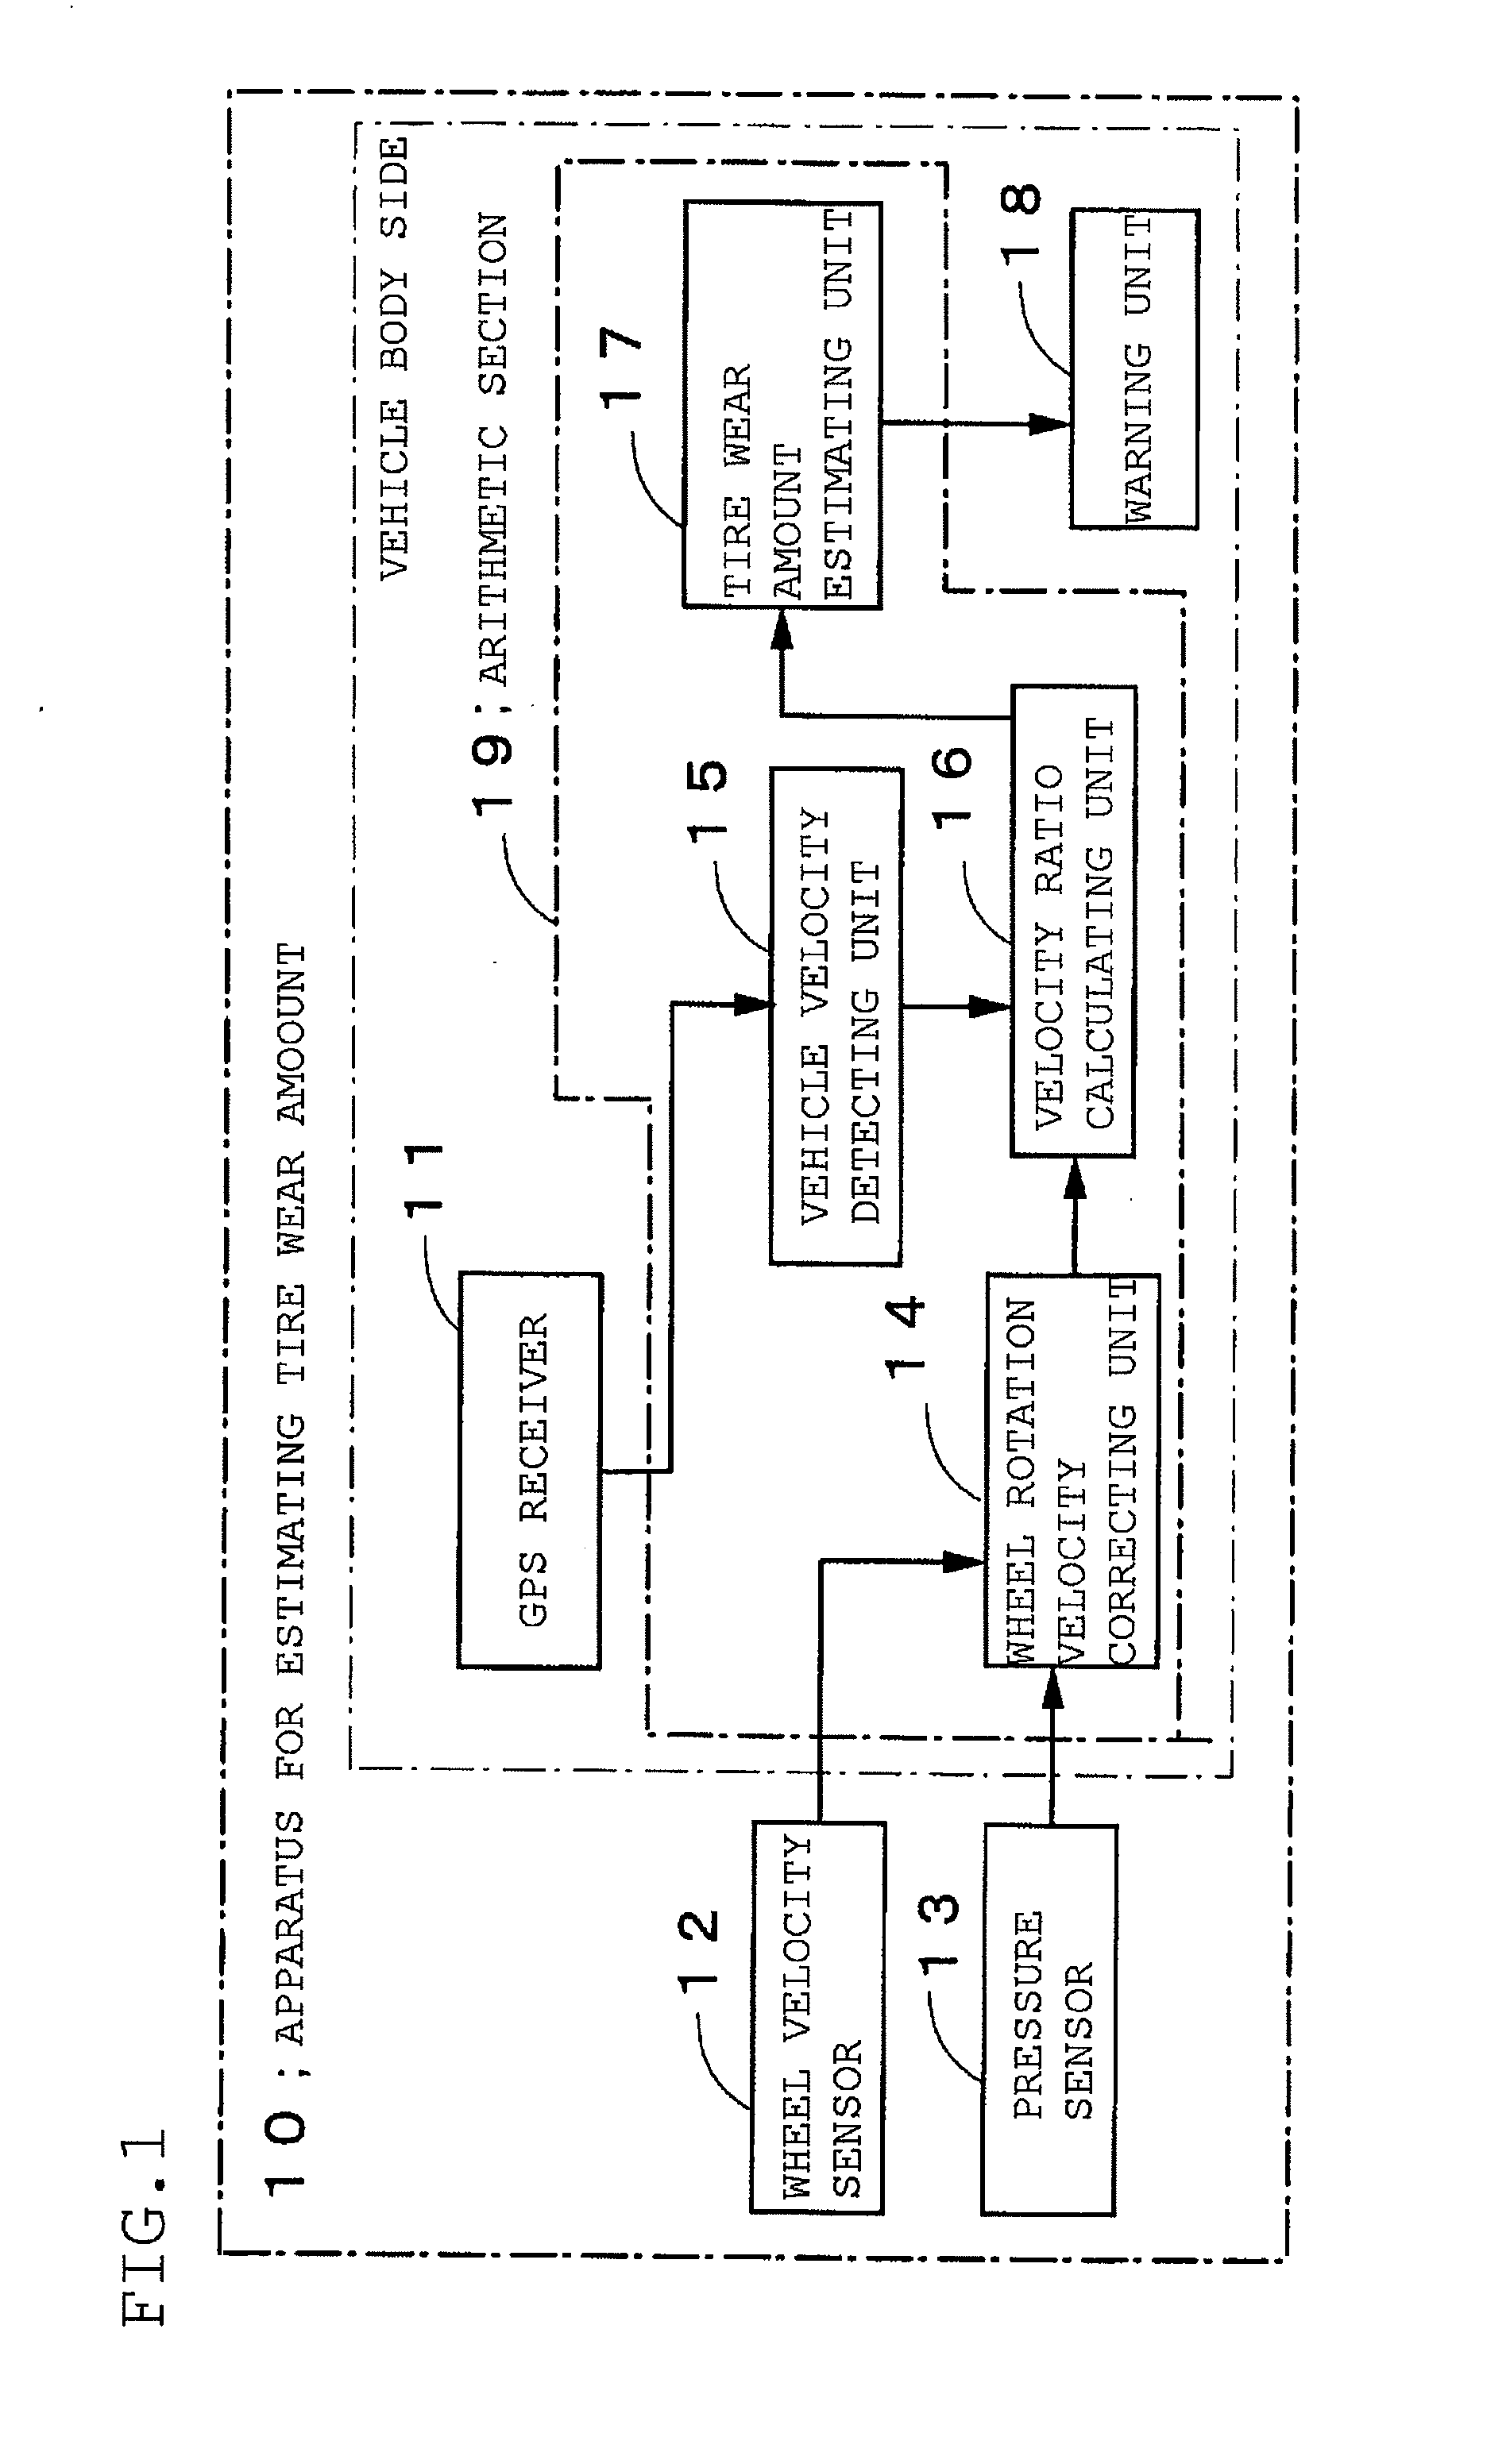 Apparatus for estimating tire wear amount and a vehicle on which the apparatus for estimating tire wear is mounted